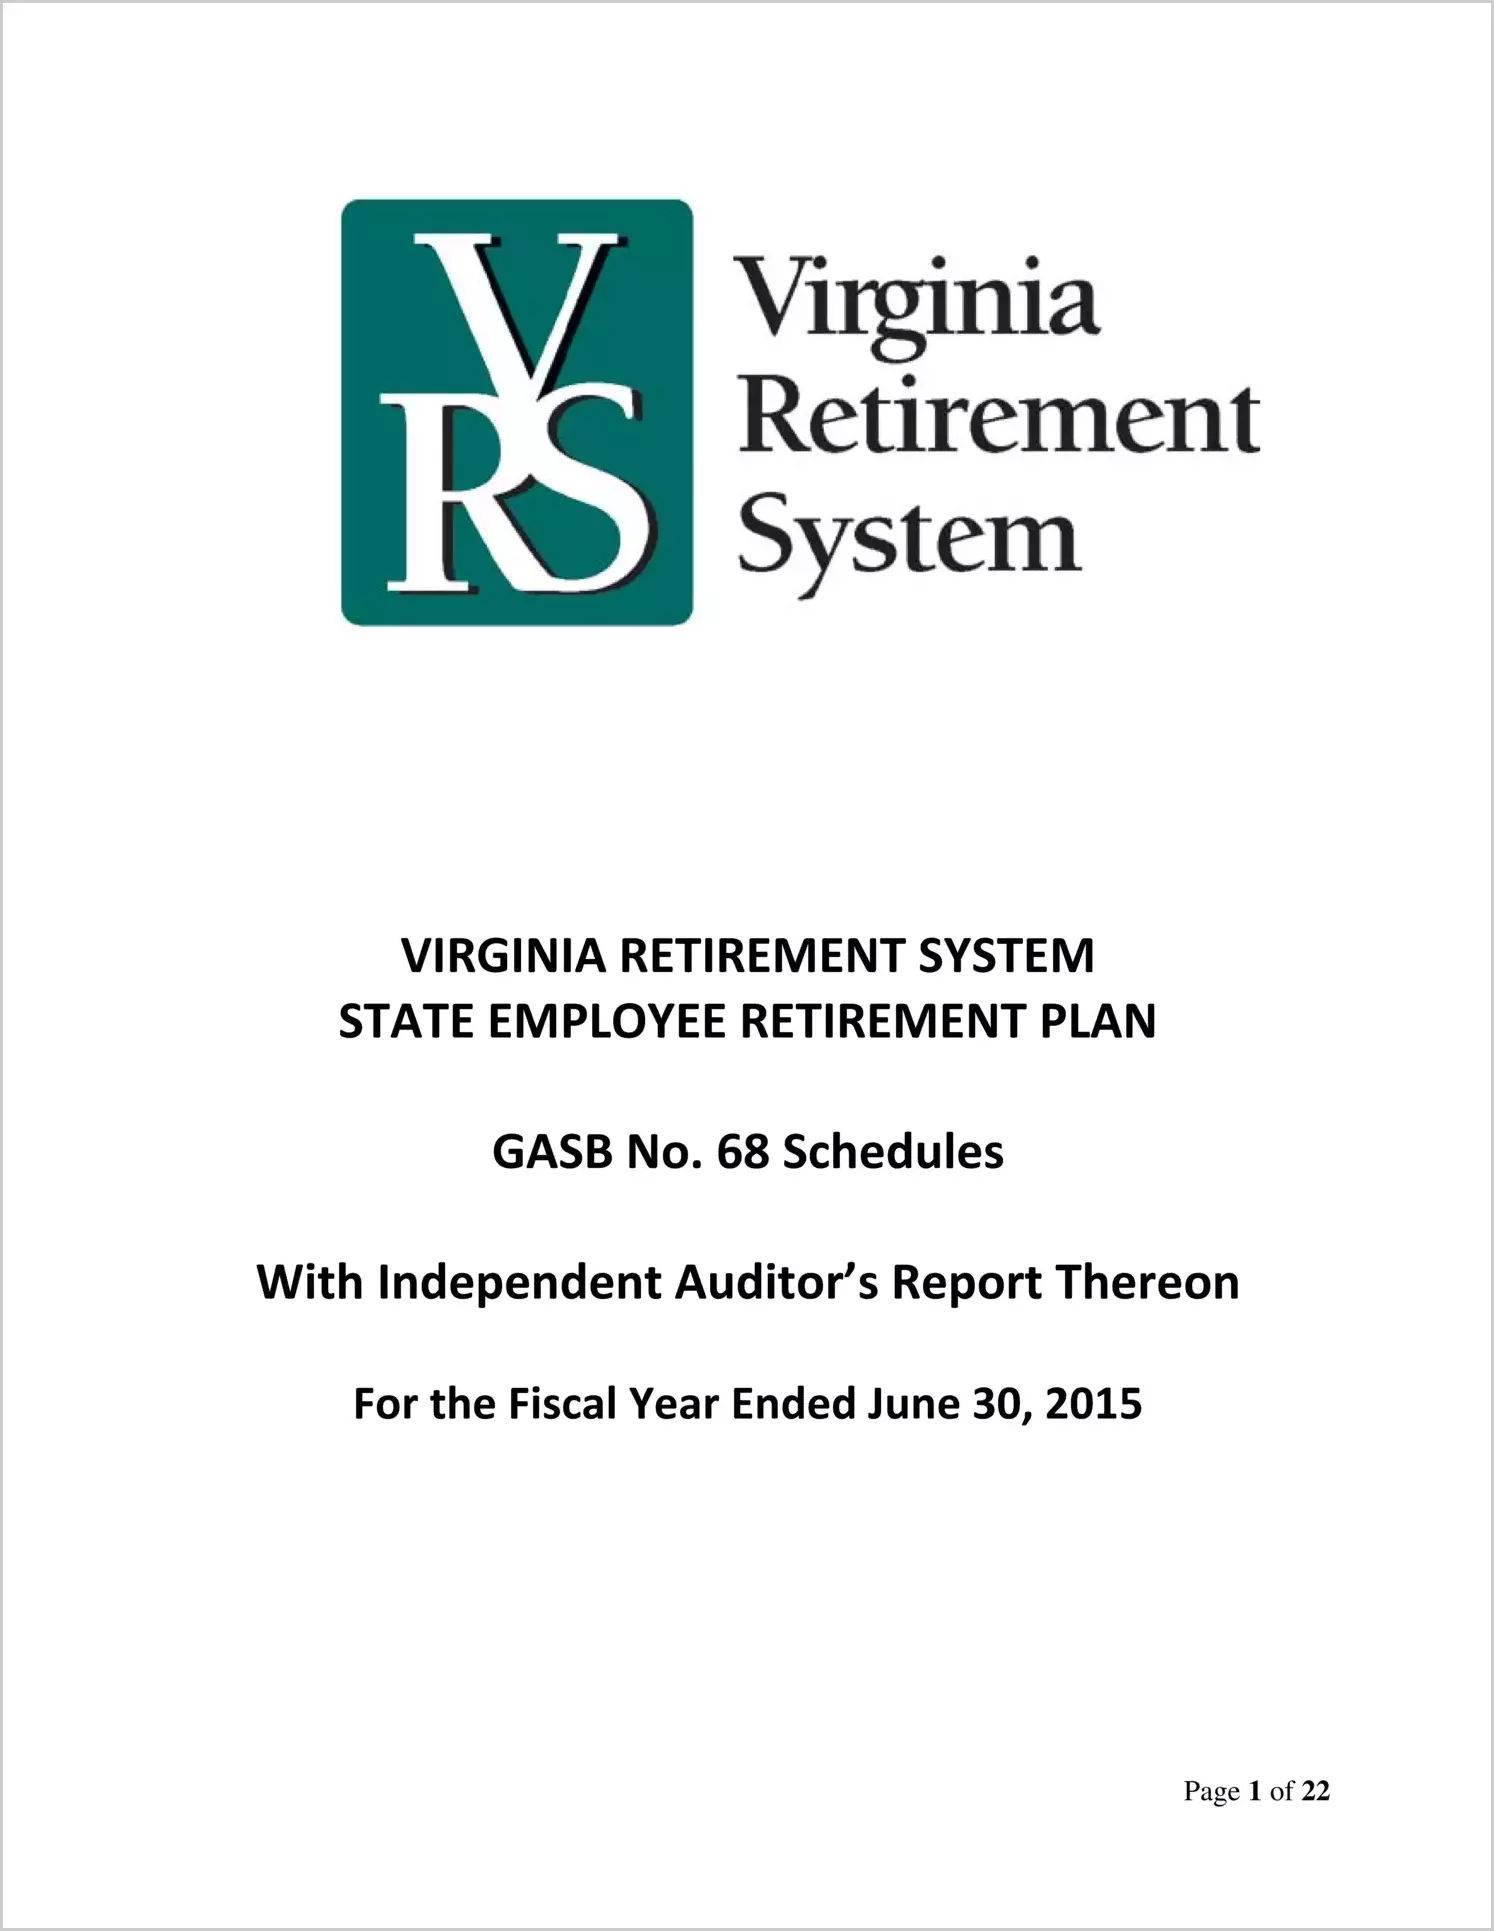 GASB 68 Schedule - MCV and Ft Monroe for the year ended June 30, 2015